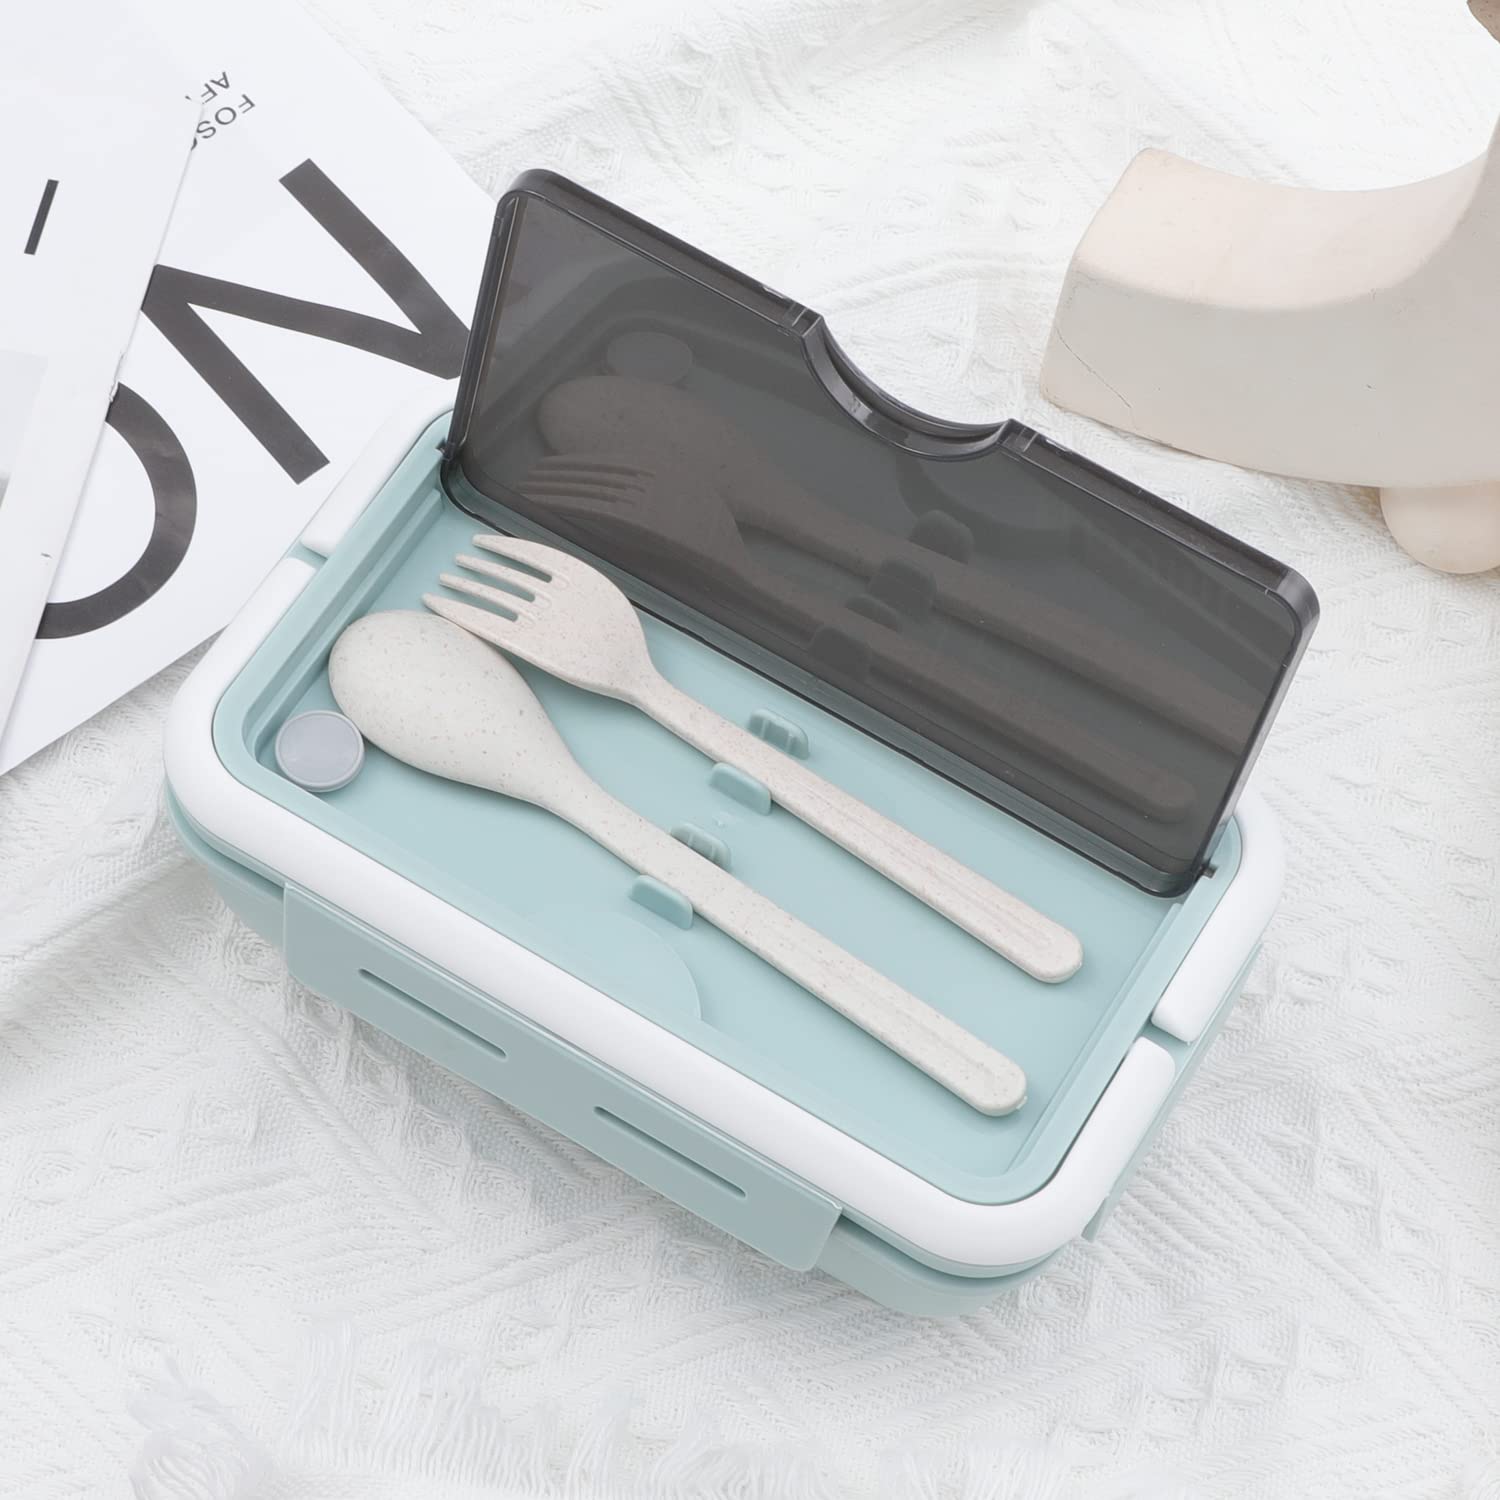 G-Ahora Versatile 2-Compartment Stitch Bento Lunch Box, Stitch Lunch Box, Leak-Proof Lunchbox Bento Box with Utensil Set for Dining Out, Work, Picnic, School (LBOX Stitch)